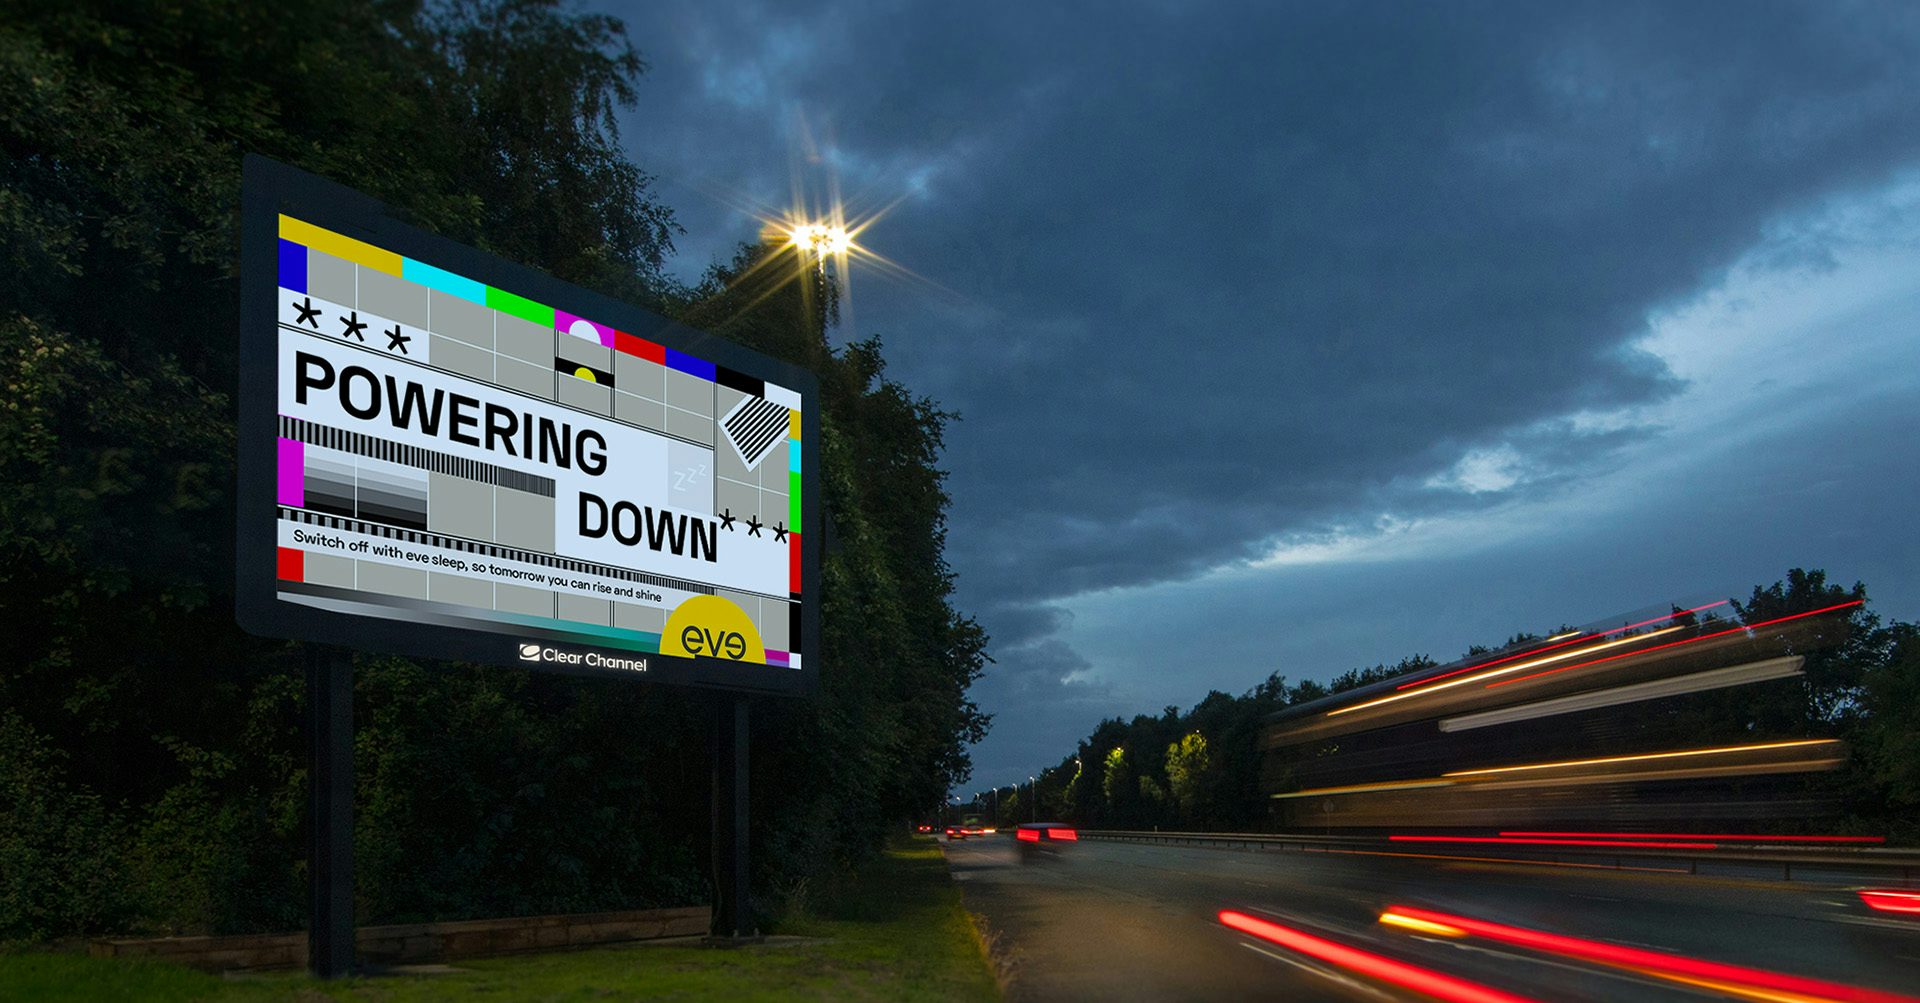 Image shows a billboard campaign by Creature London that reads 'Powering Down'